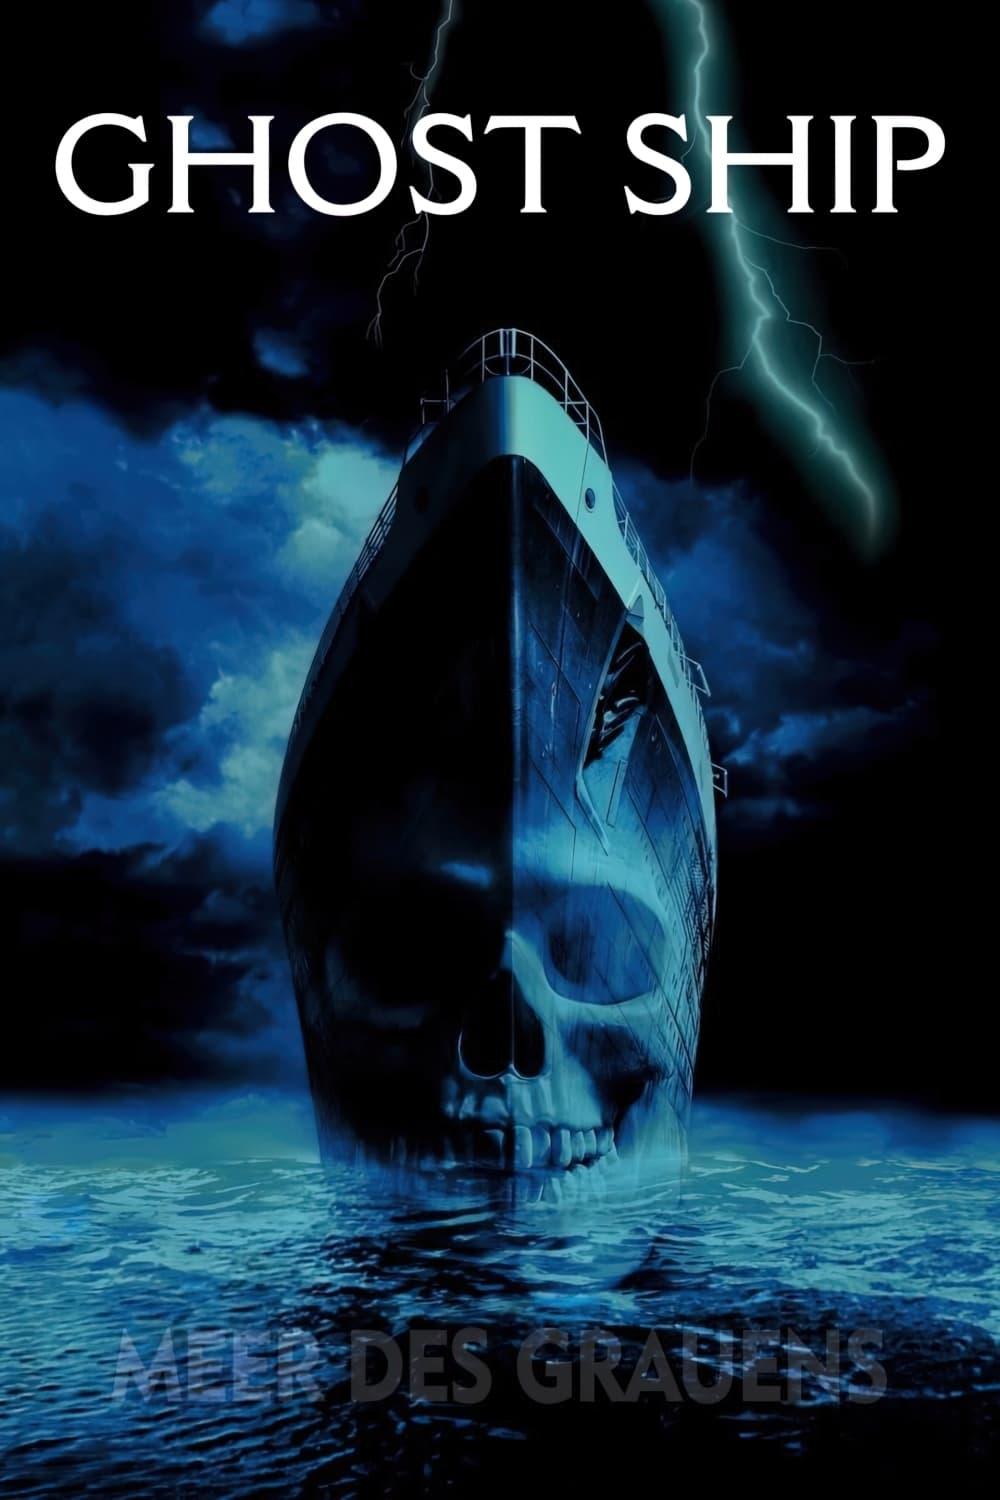 Ghost Ship poster